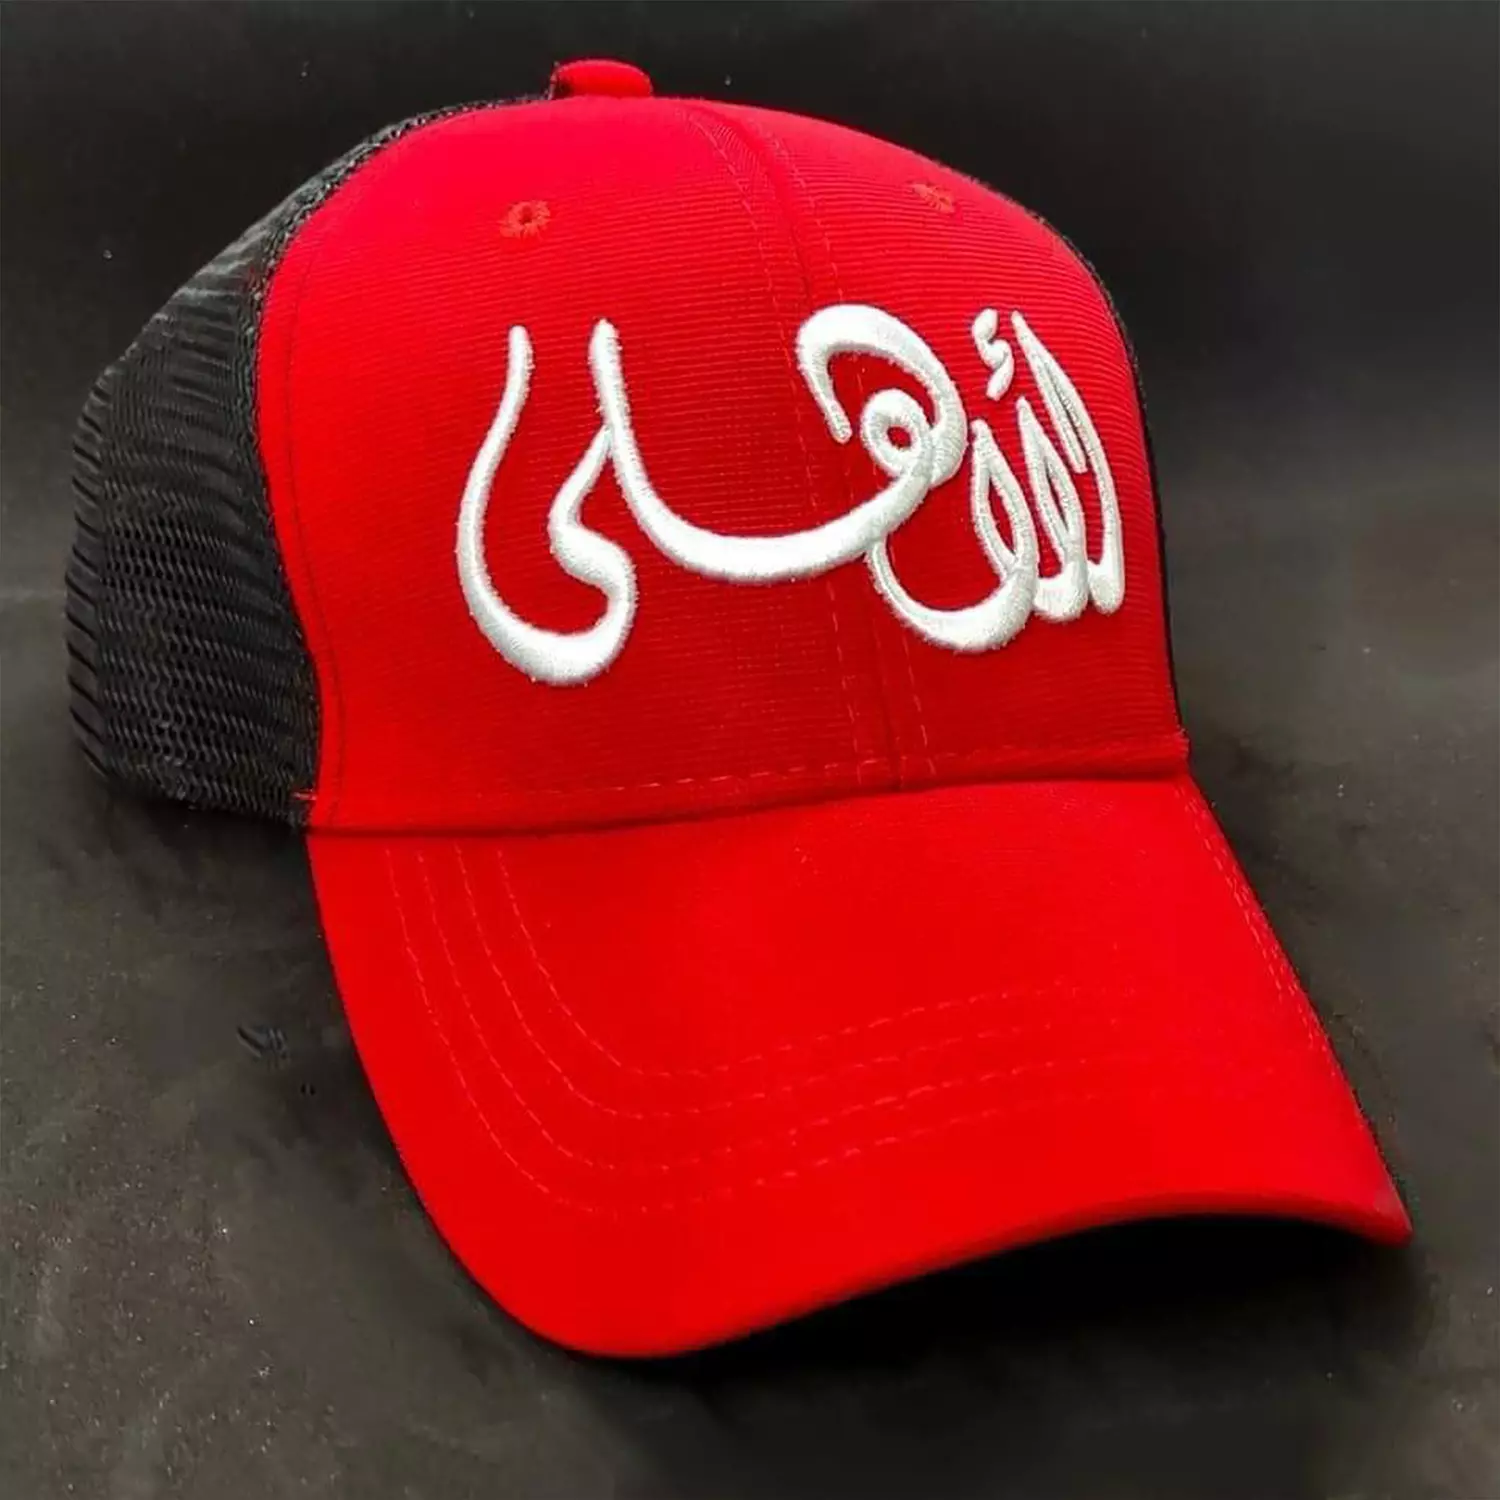 Ahly Red Cap hover image